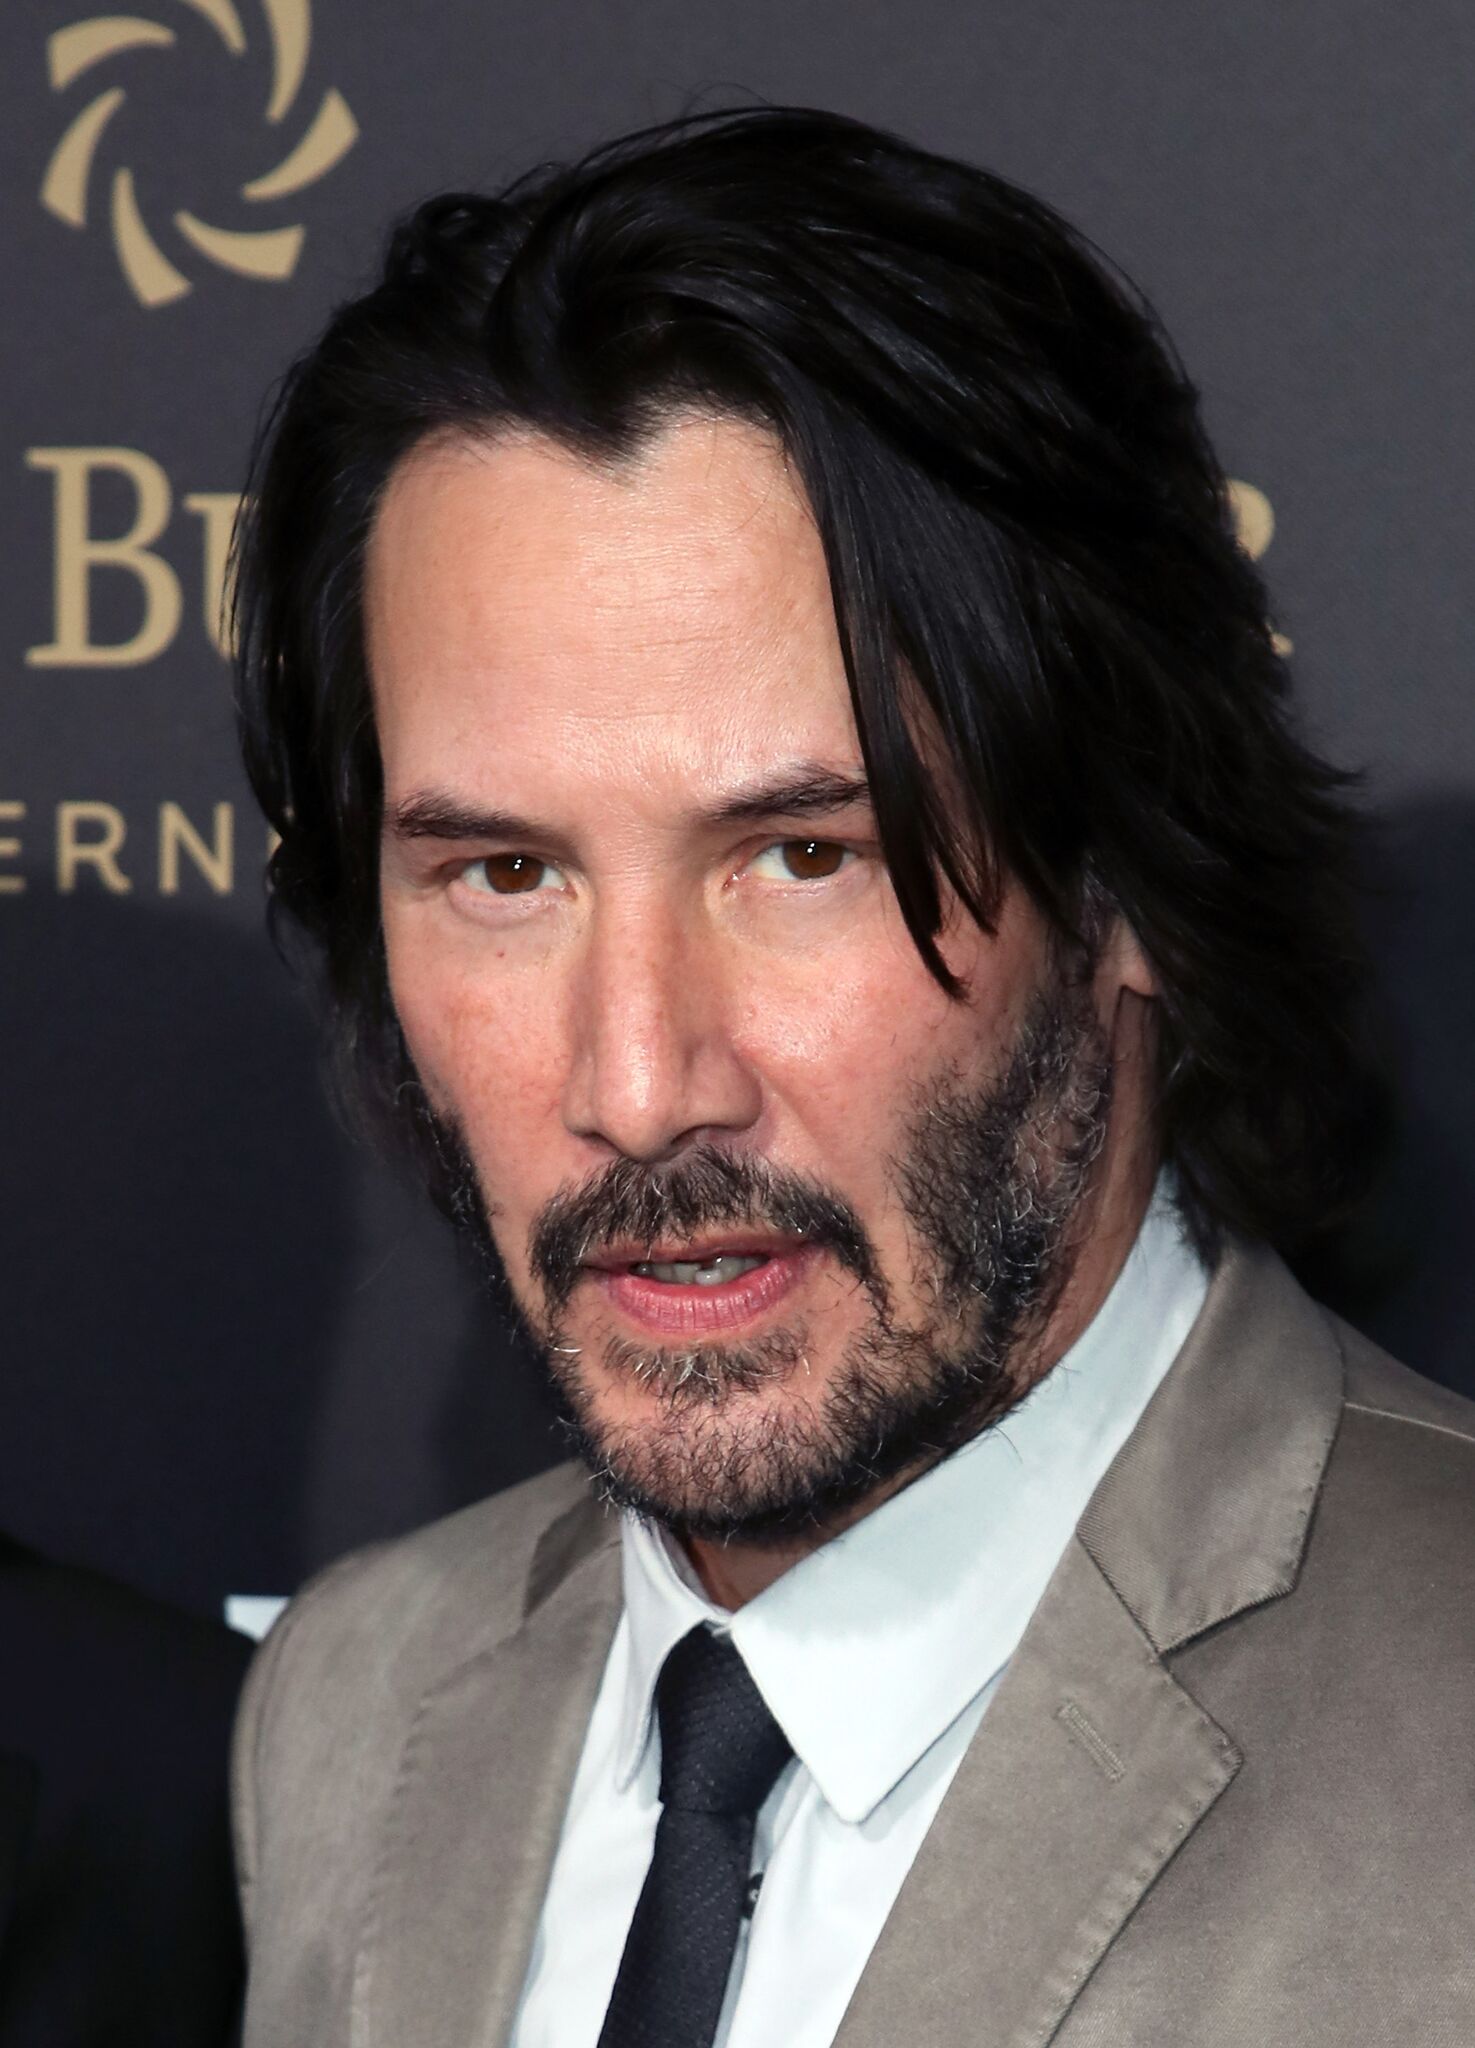 Actor Keanu Reeves attends the premiere of Summit Entertainment's "John Wick: Chapter Two"  | Getty Images